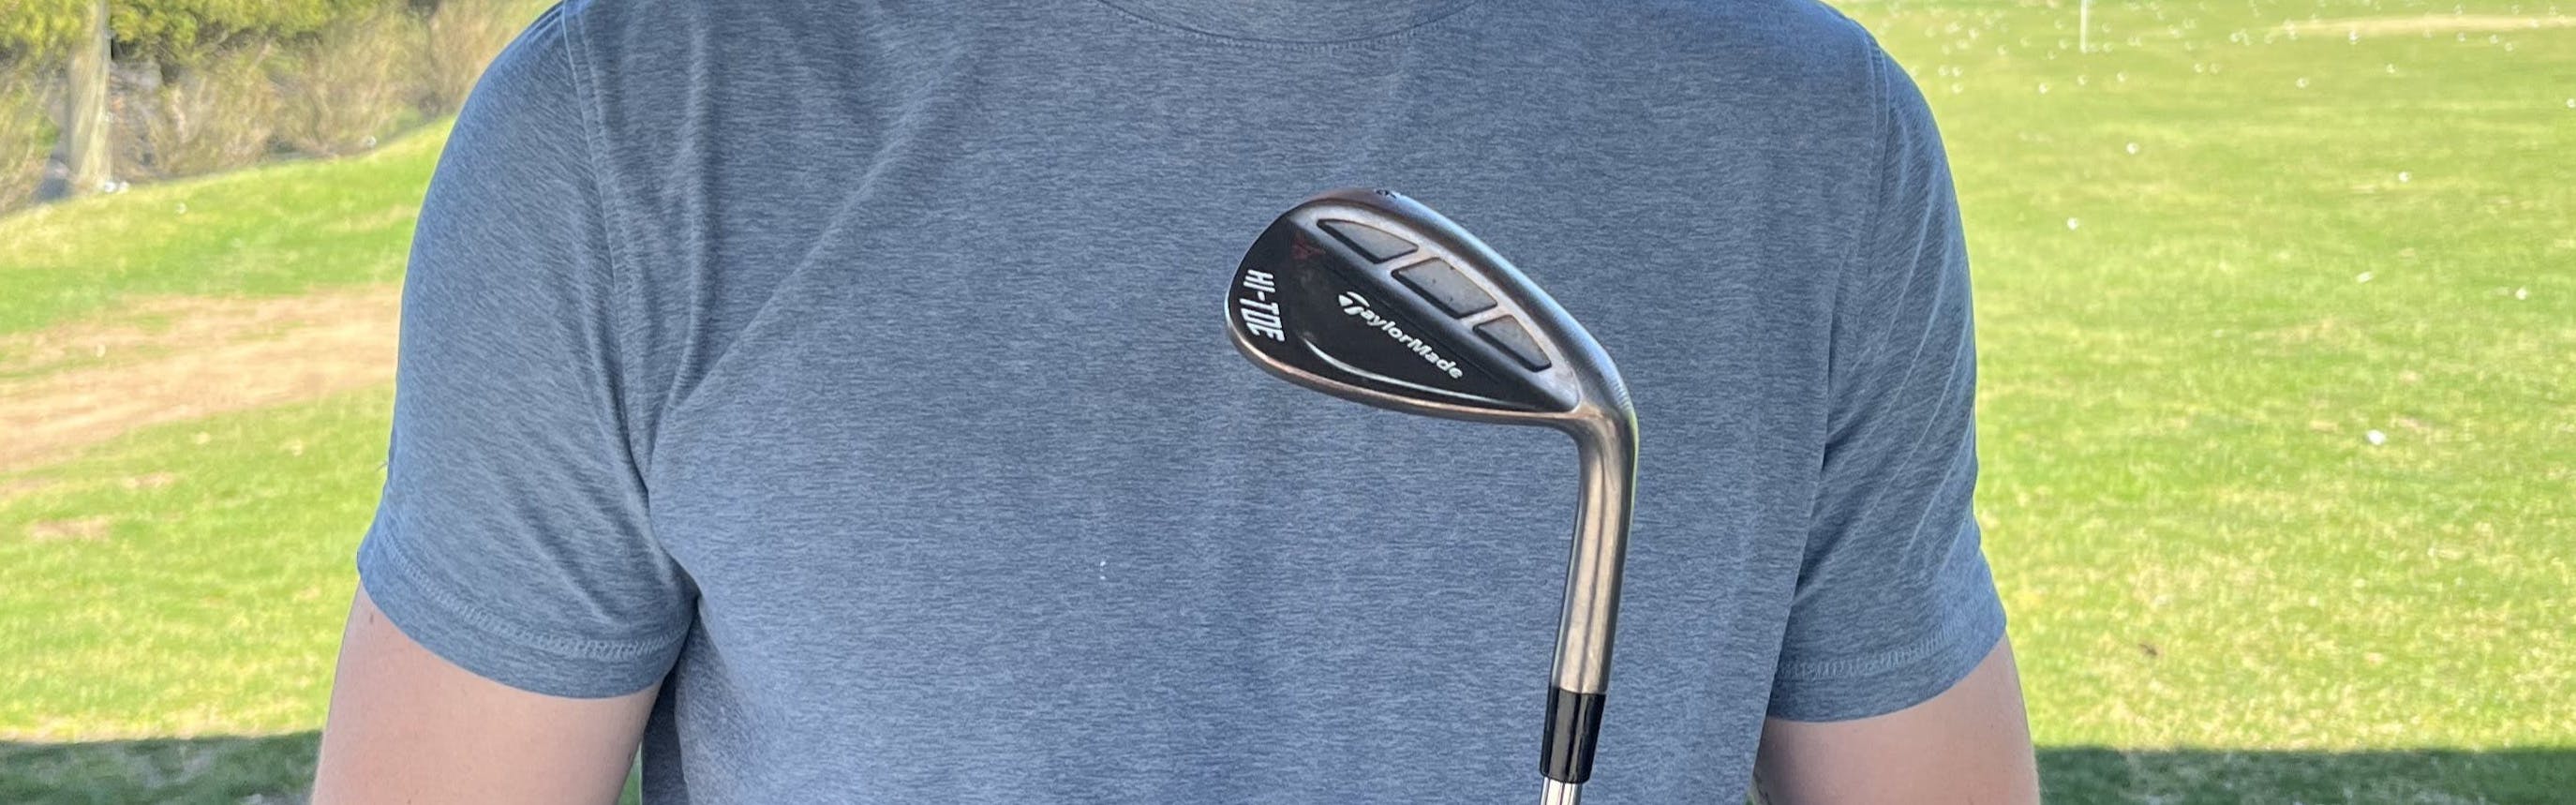 Man holds the TaylorMade MG Hi-Toe RAW Wedge.